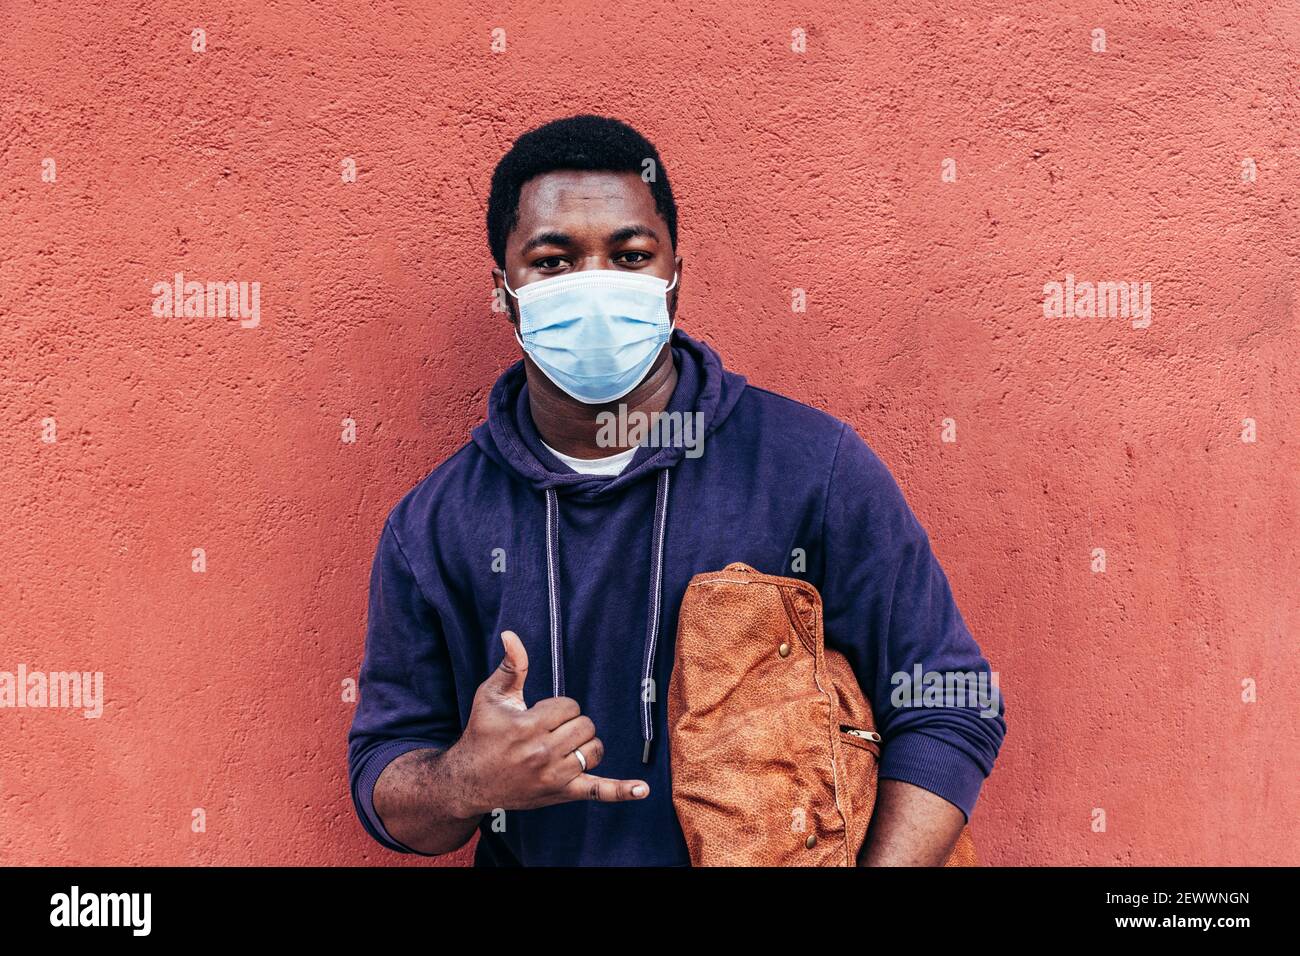 Portrait of an African American boy with face mask on red wall background. Stock Photo